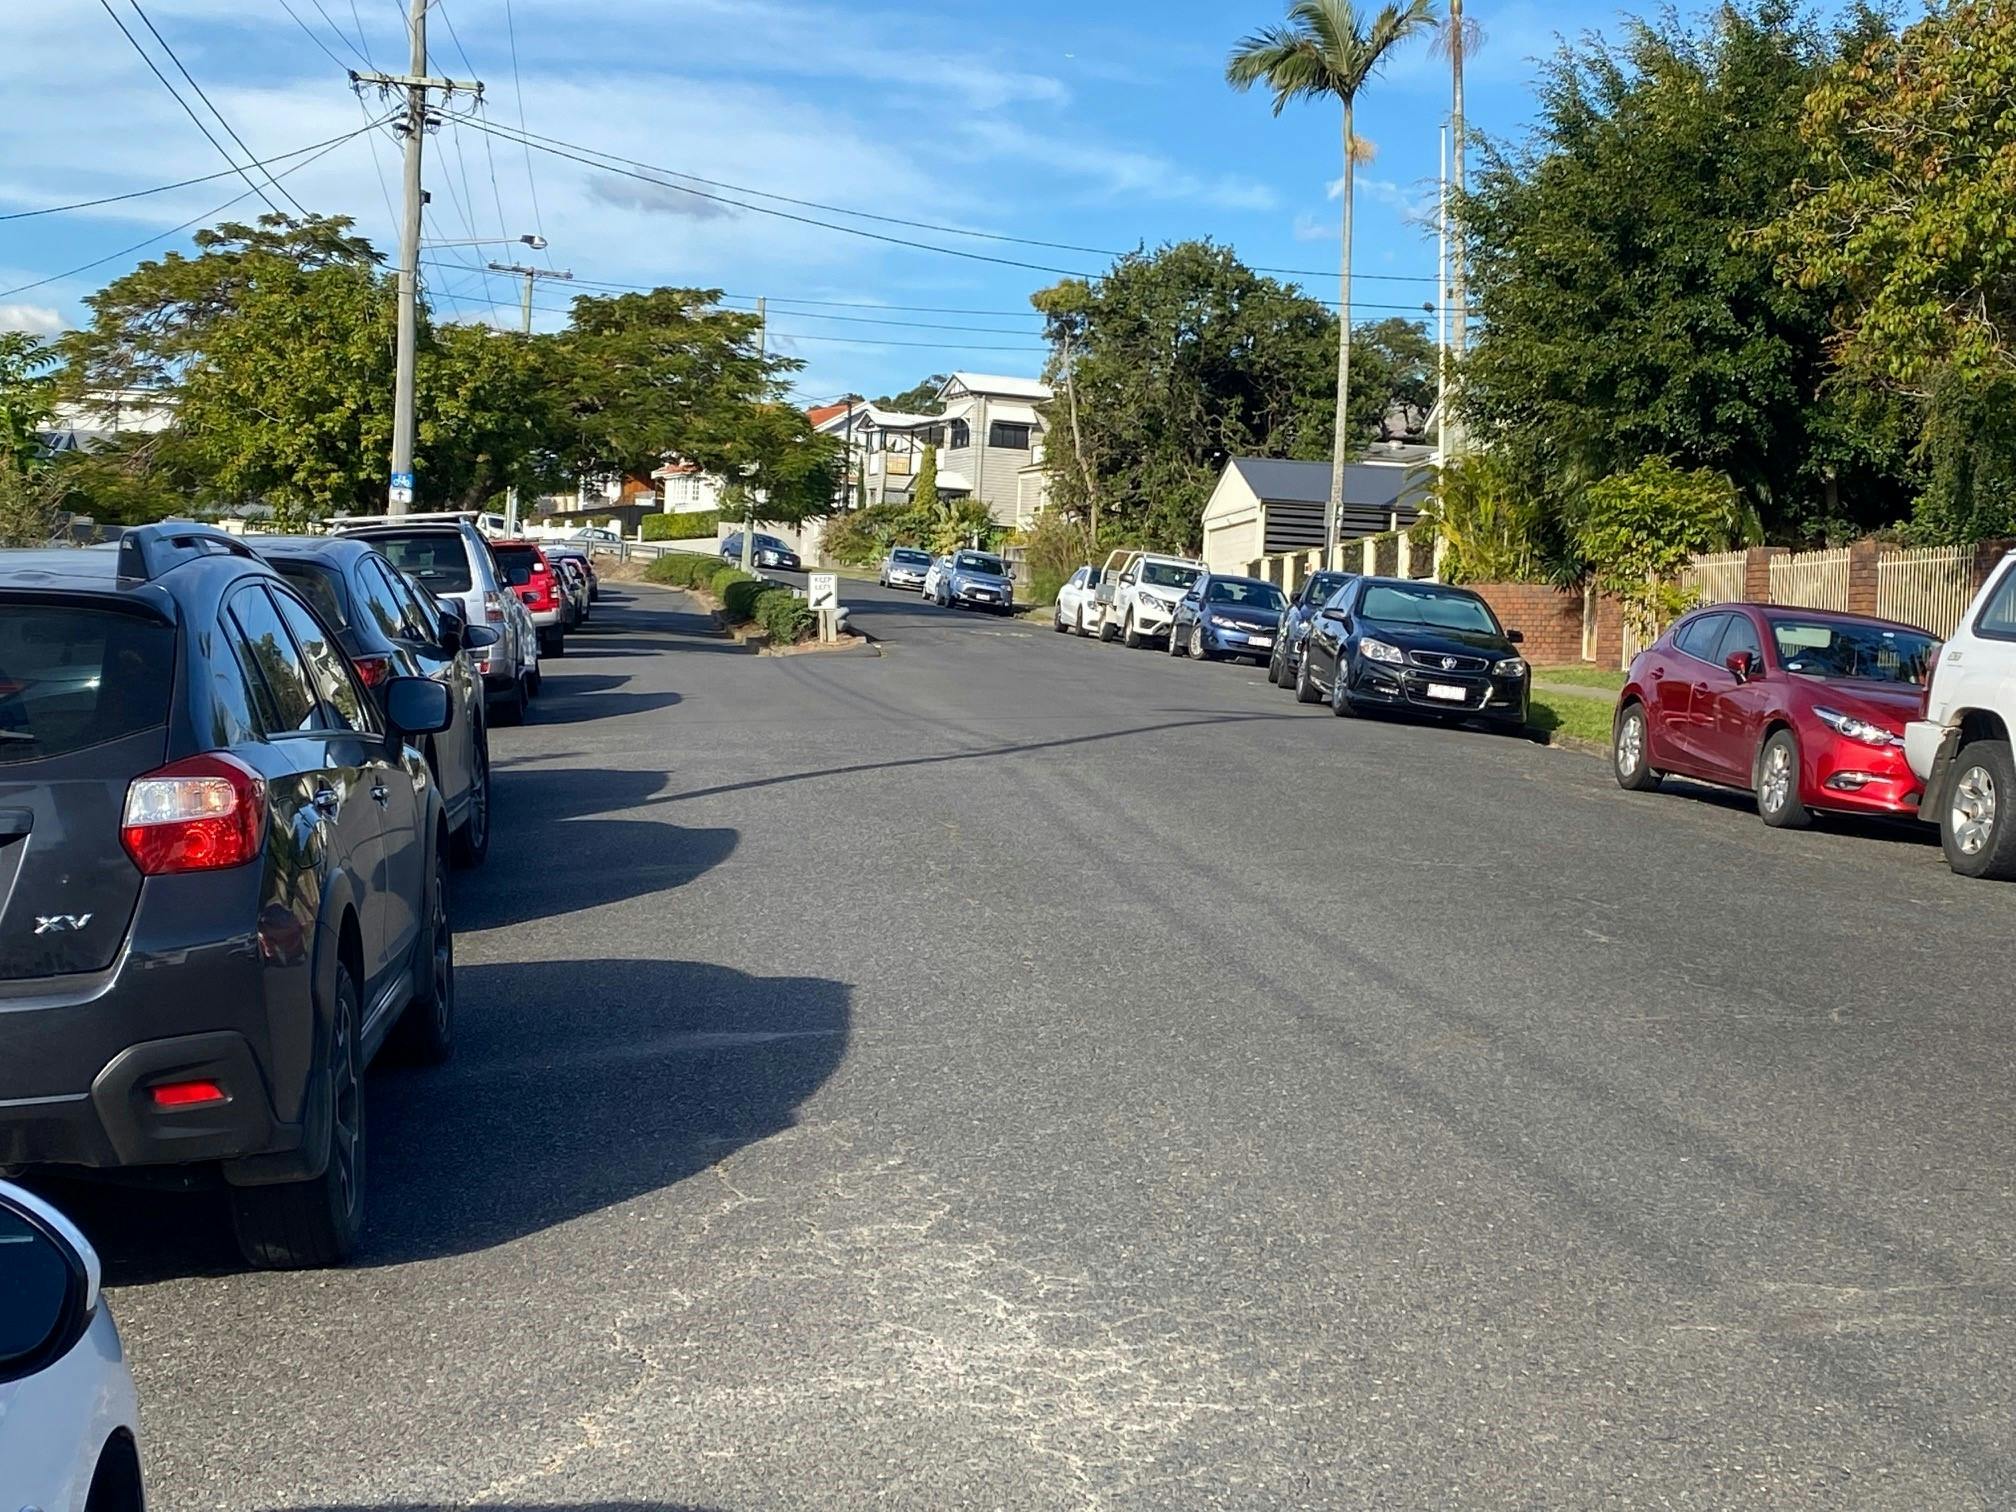 Another photo of cars parked along both sides of Nicholson Street, Greenslopes